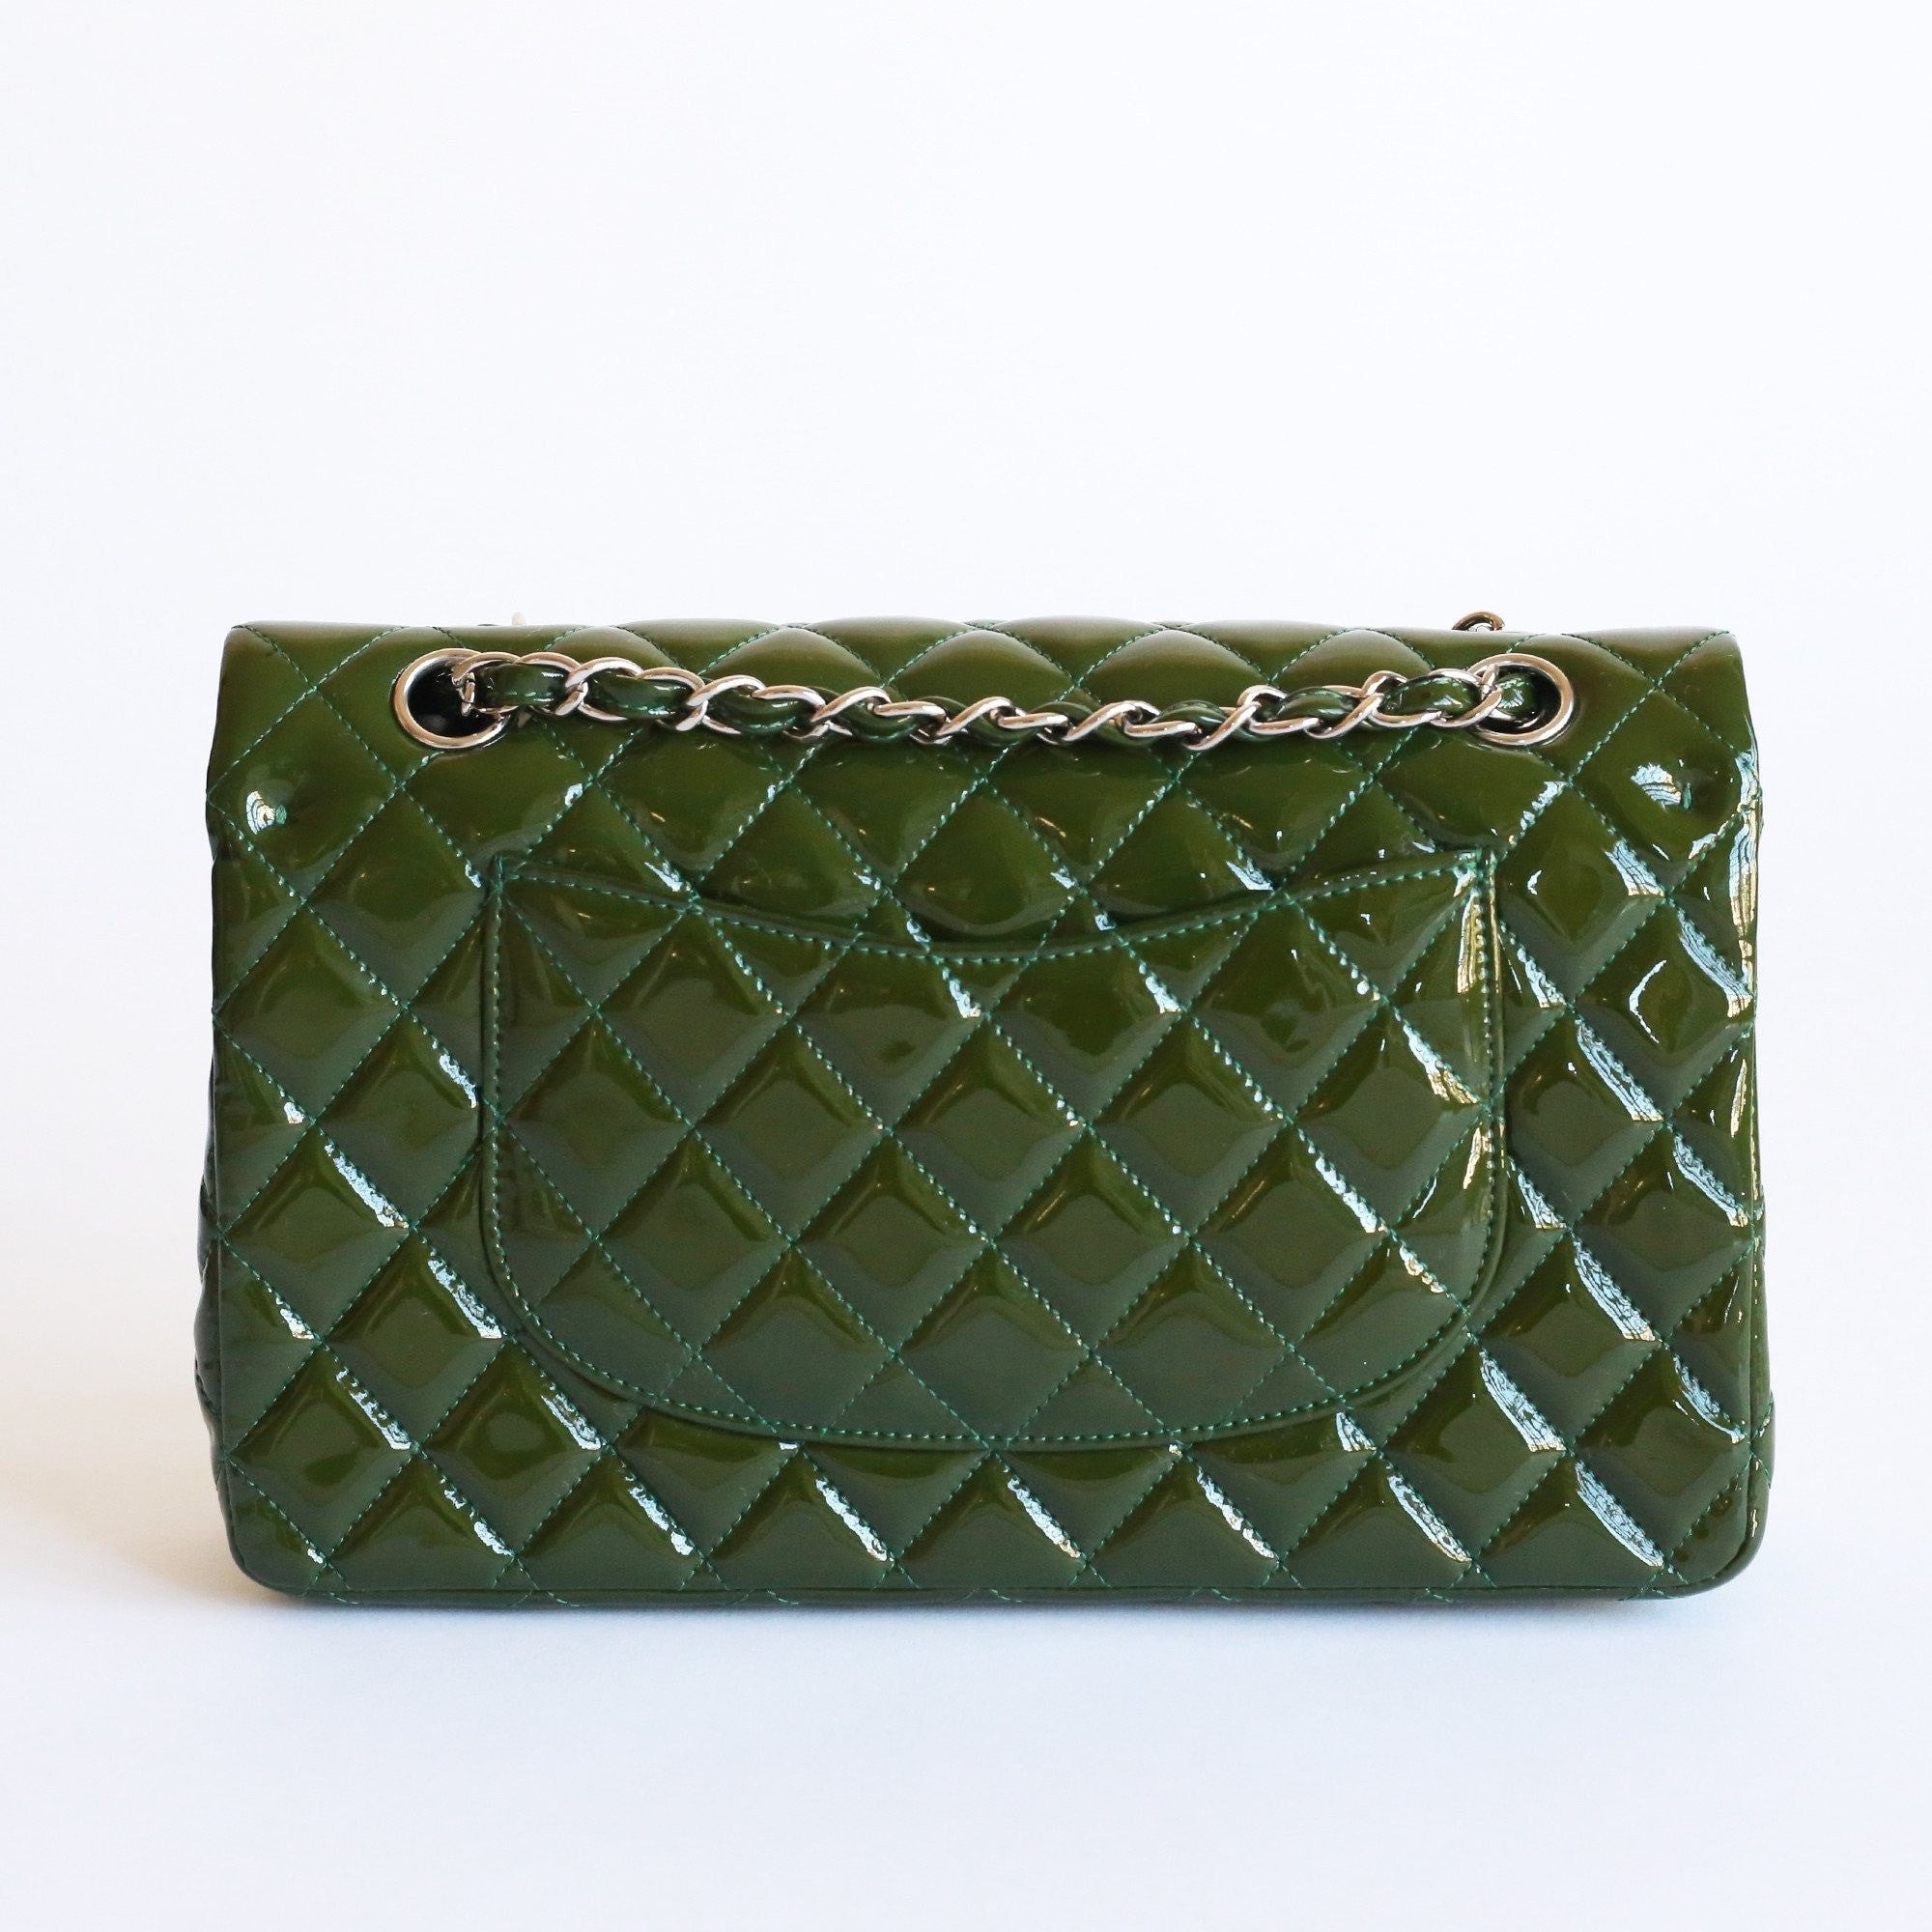 1992 Chanel Blsck Quilted Lambskin Vintage Small Classic Double